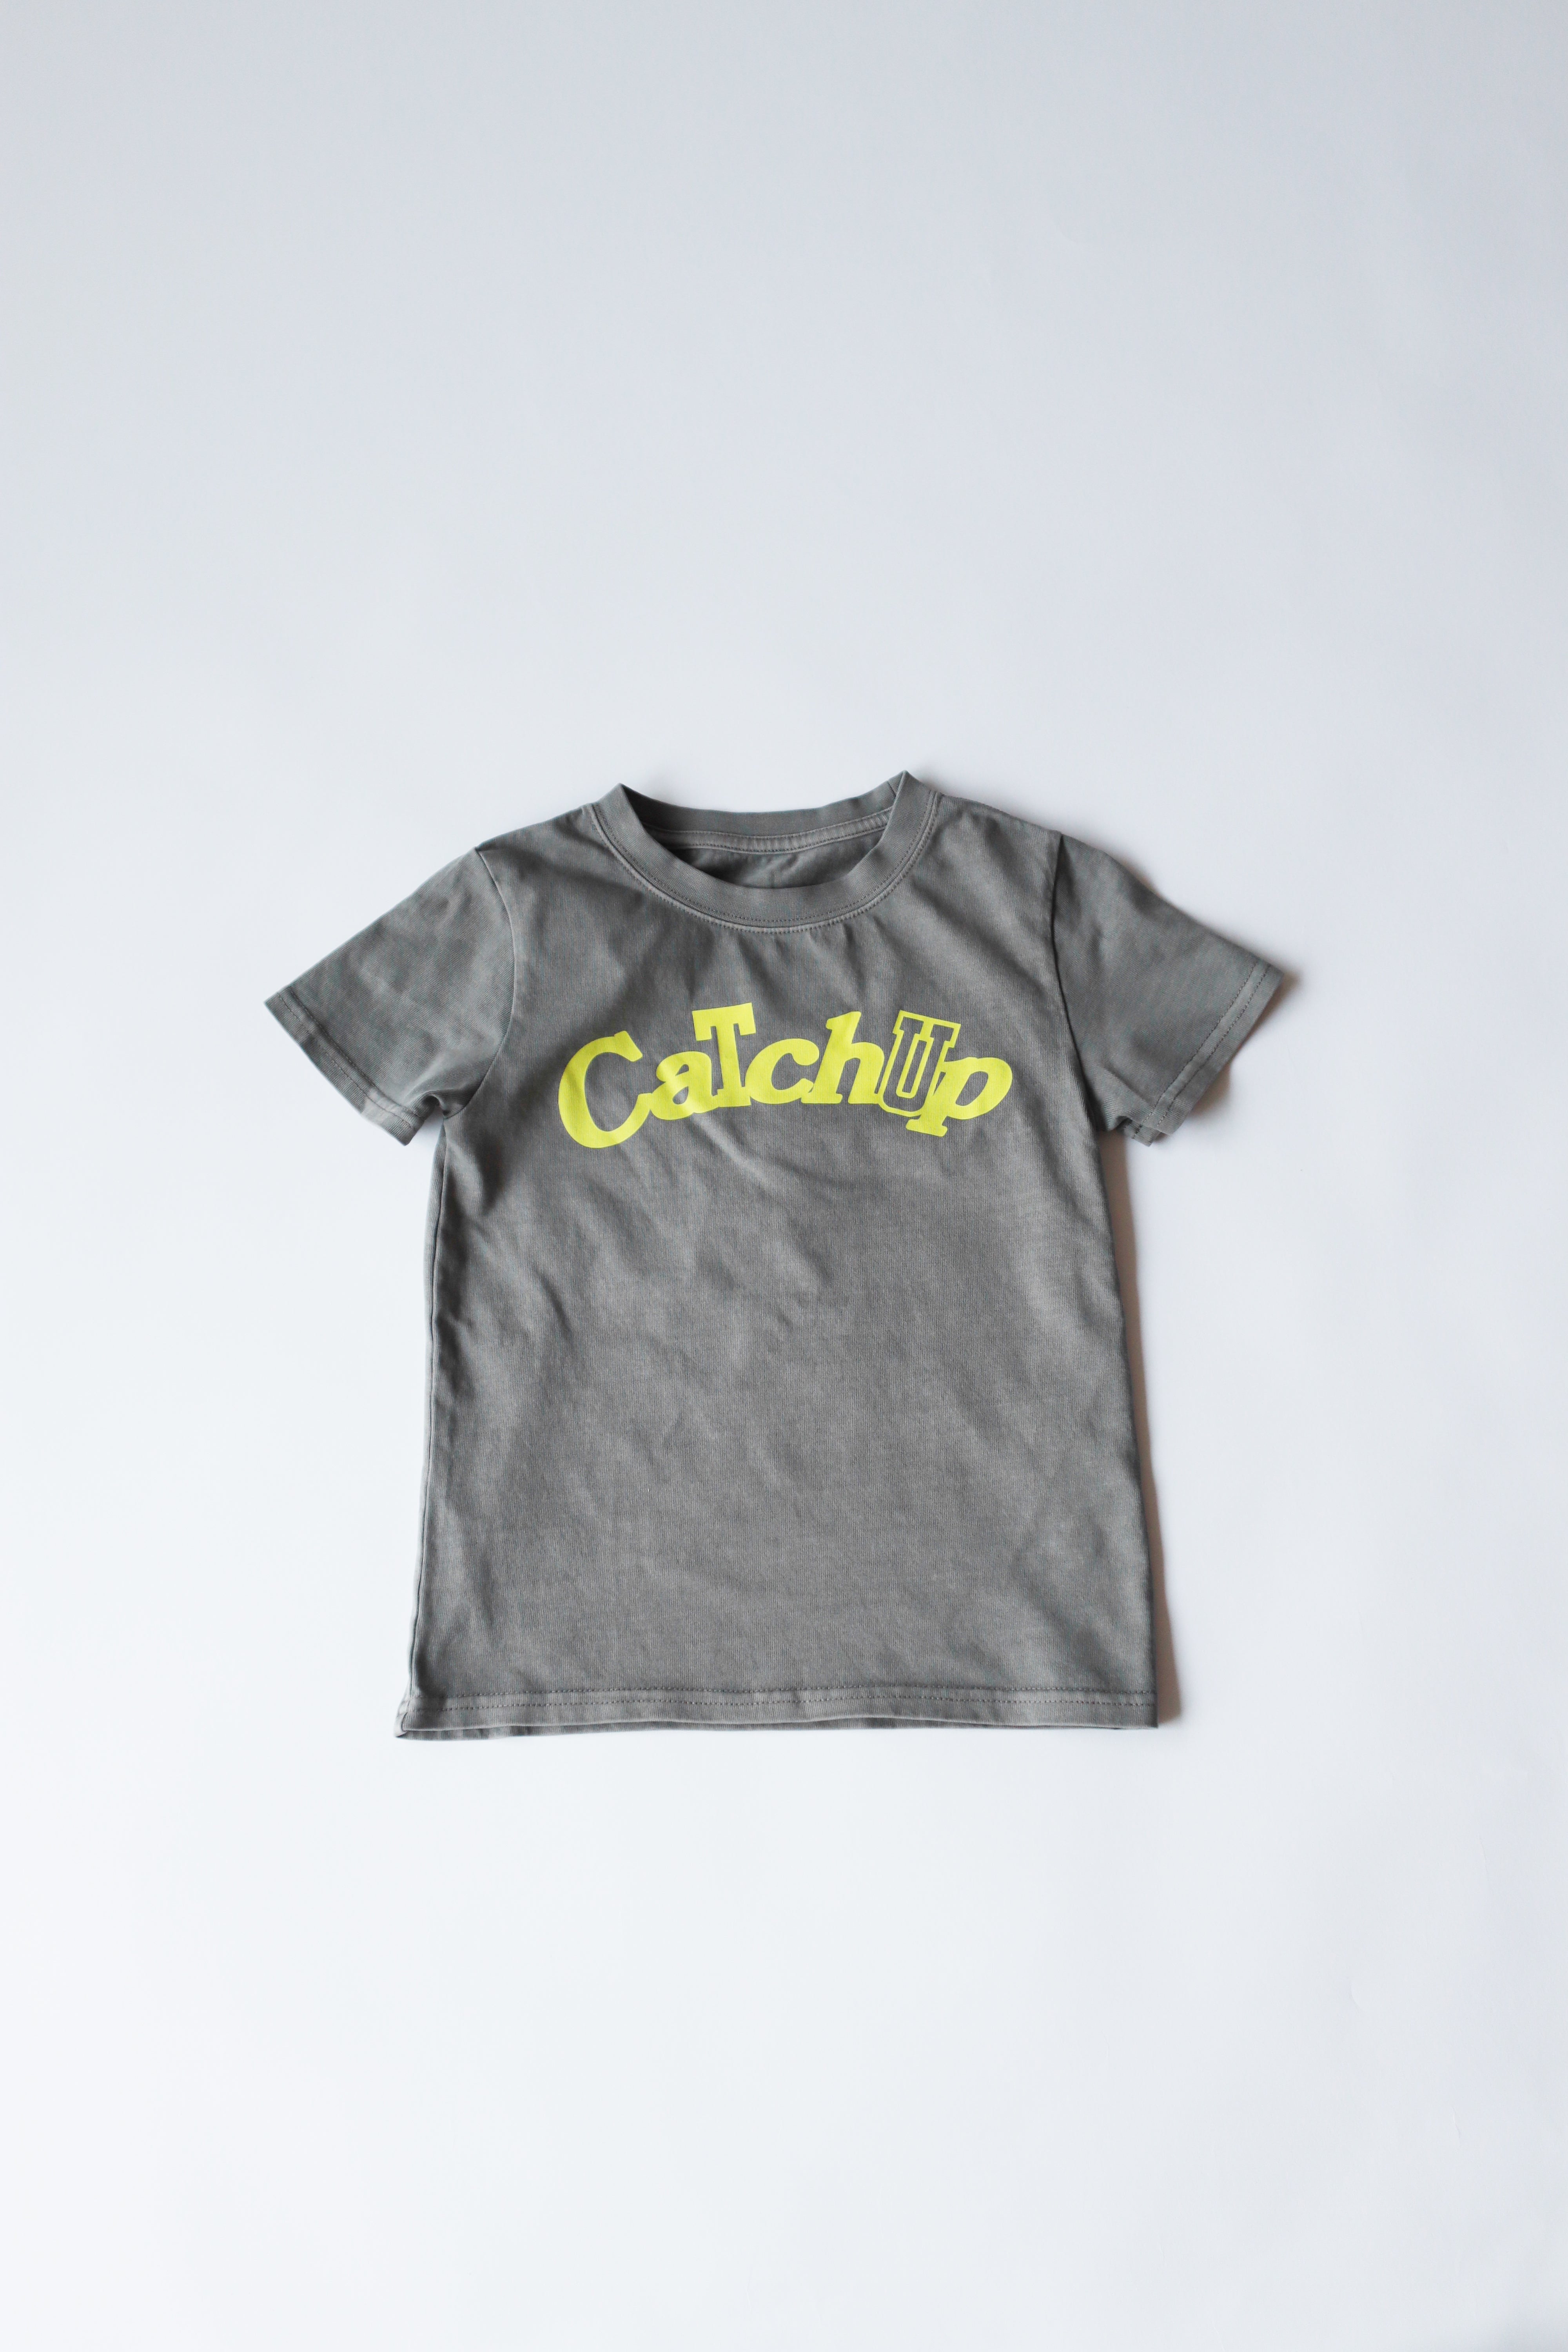 【Catchup】CatchupピグメントTシャツ